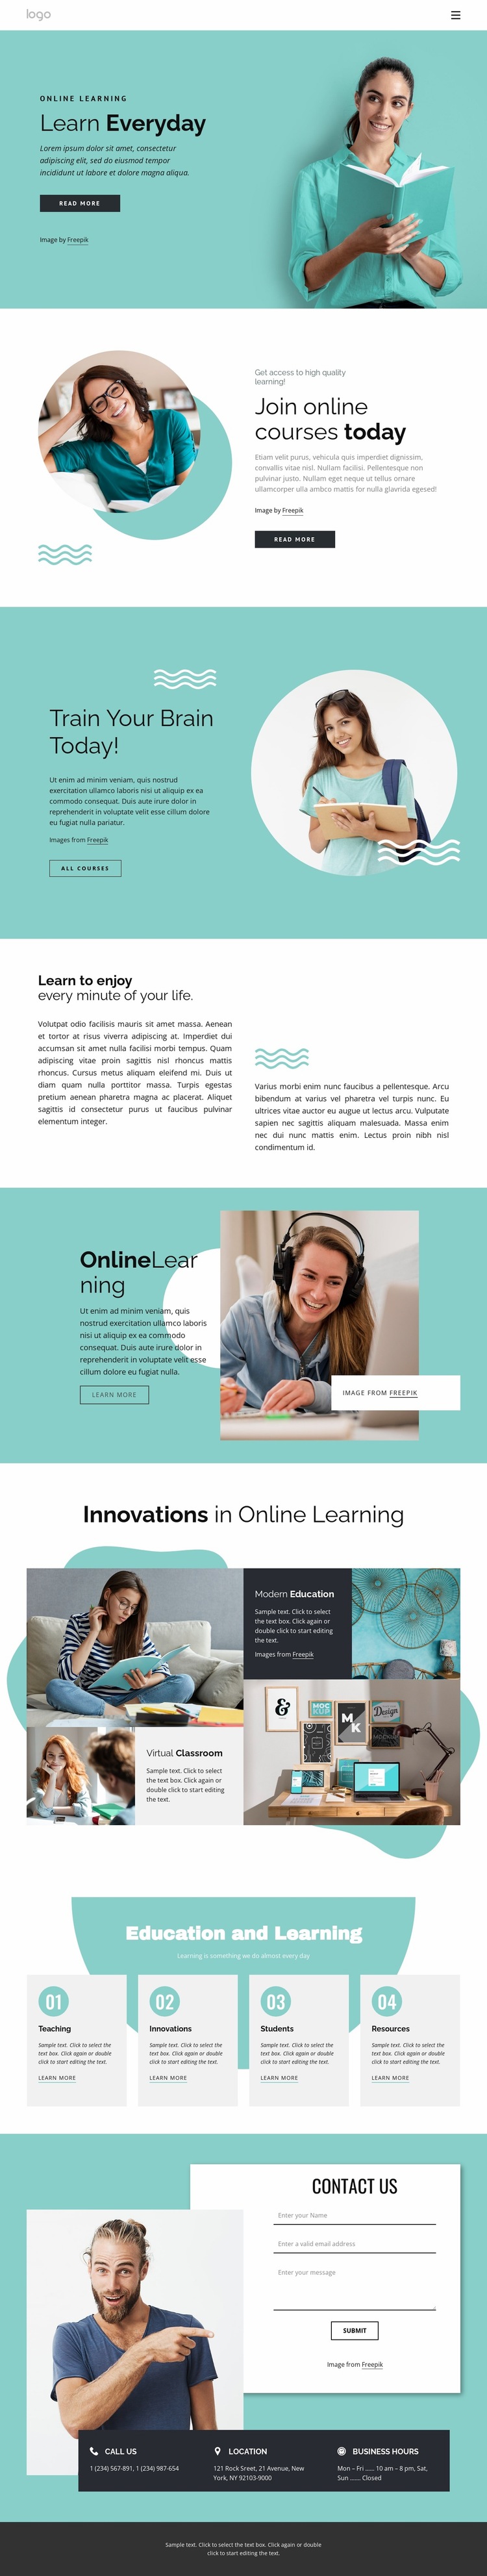 Learning is a lifelong process Website Builder Templates